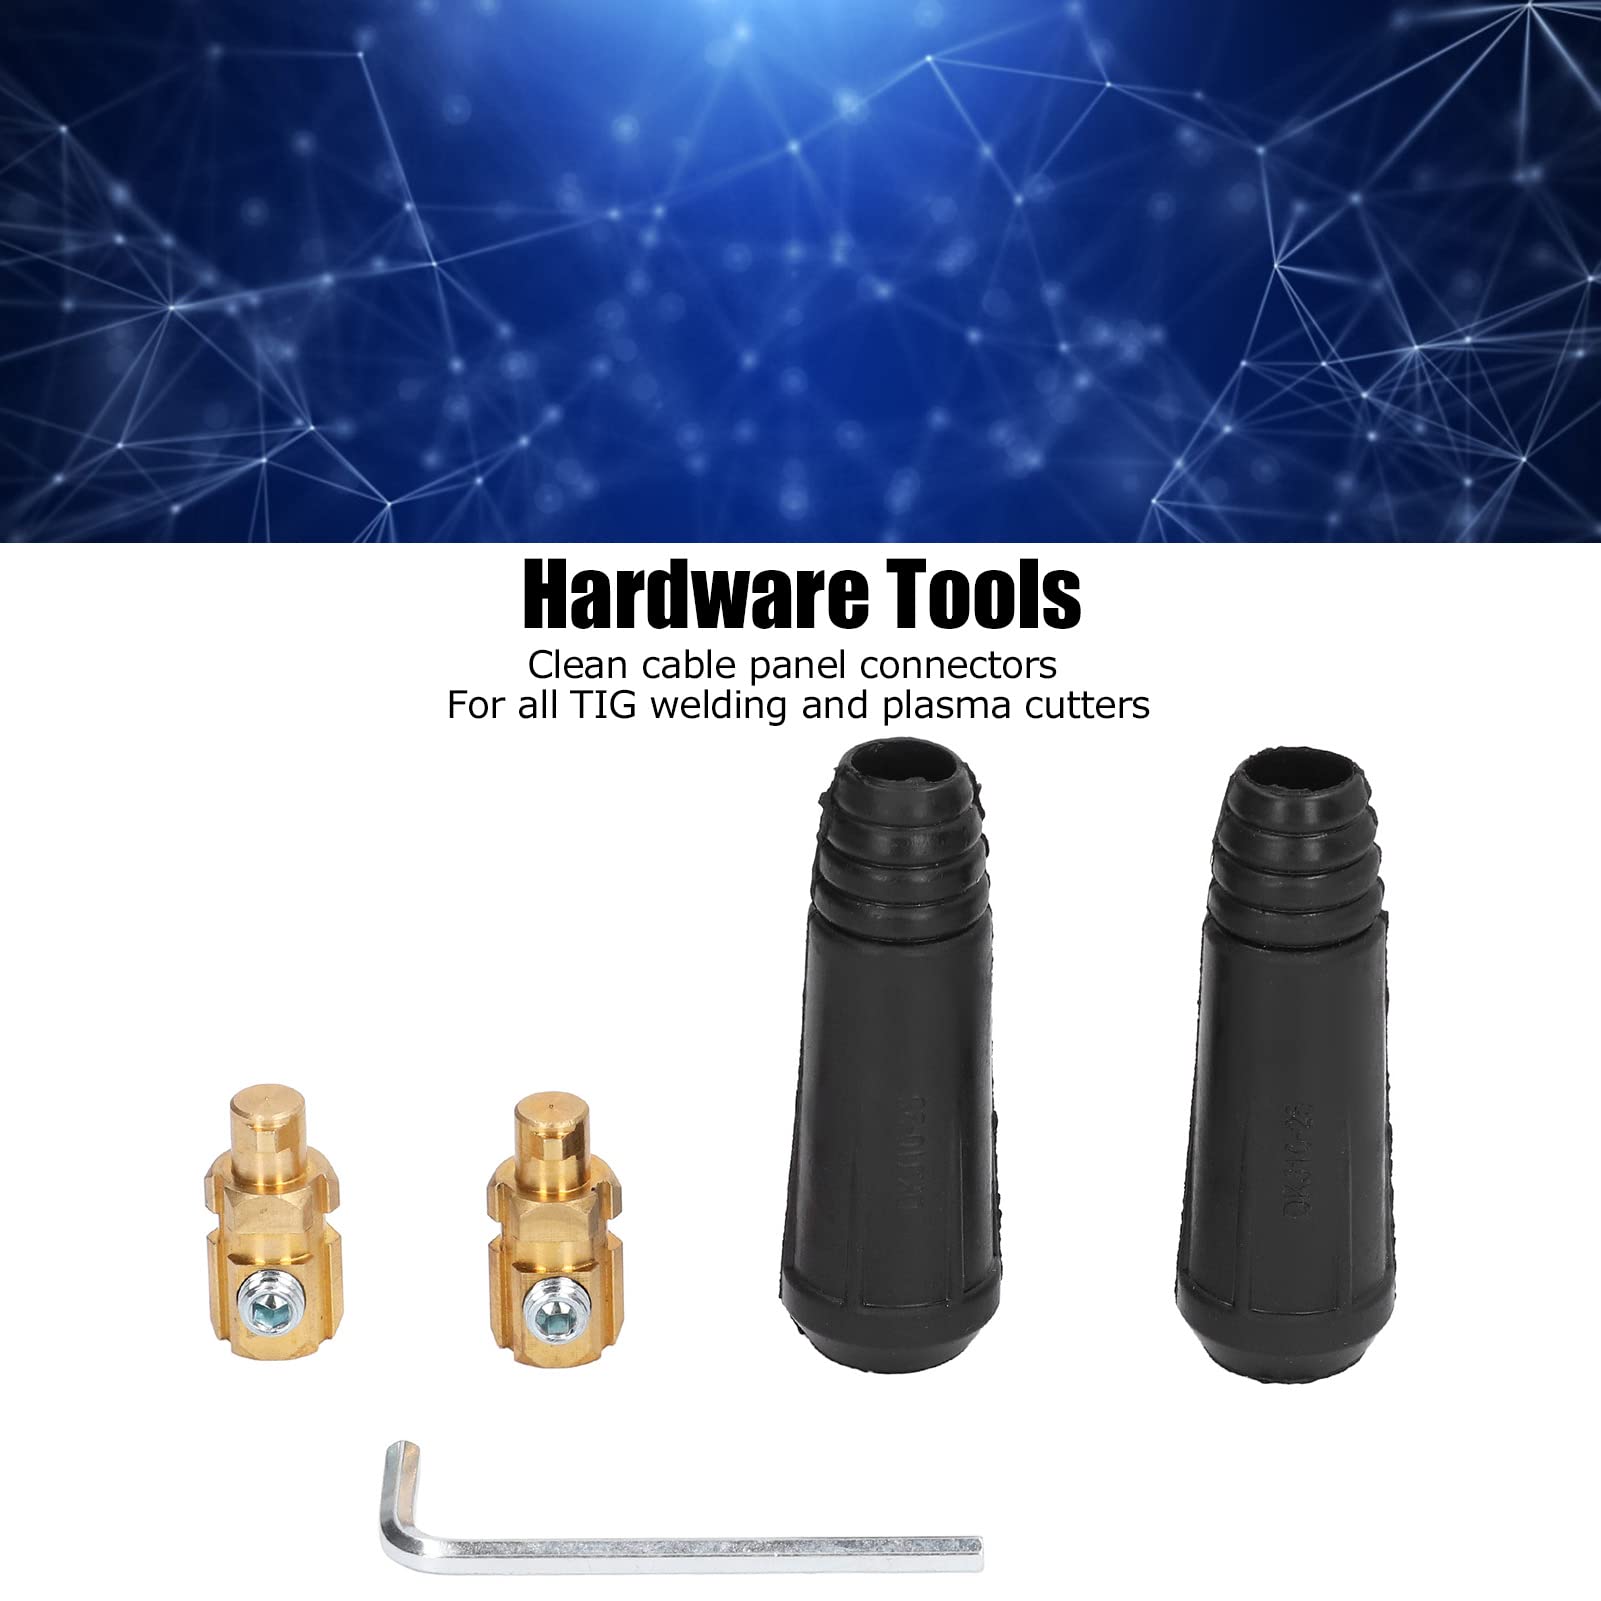 2 Set 200A DKJ10‑25 Welding Cable Connectors, Male Welder Quick Fitting Plug Accessories Hardware Tools for TIG Welding Plasma Cutters